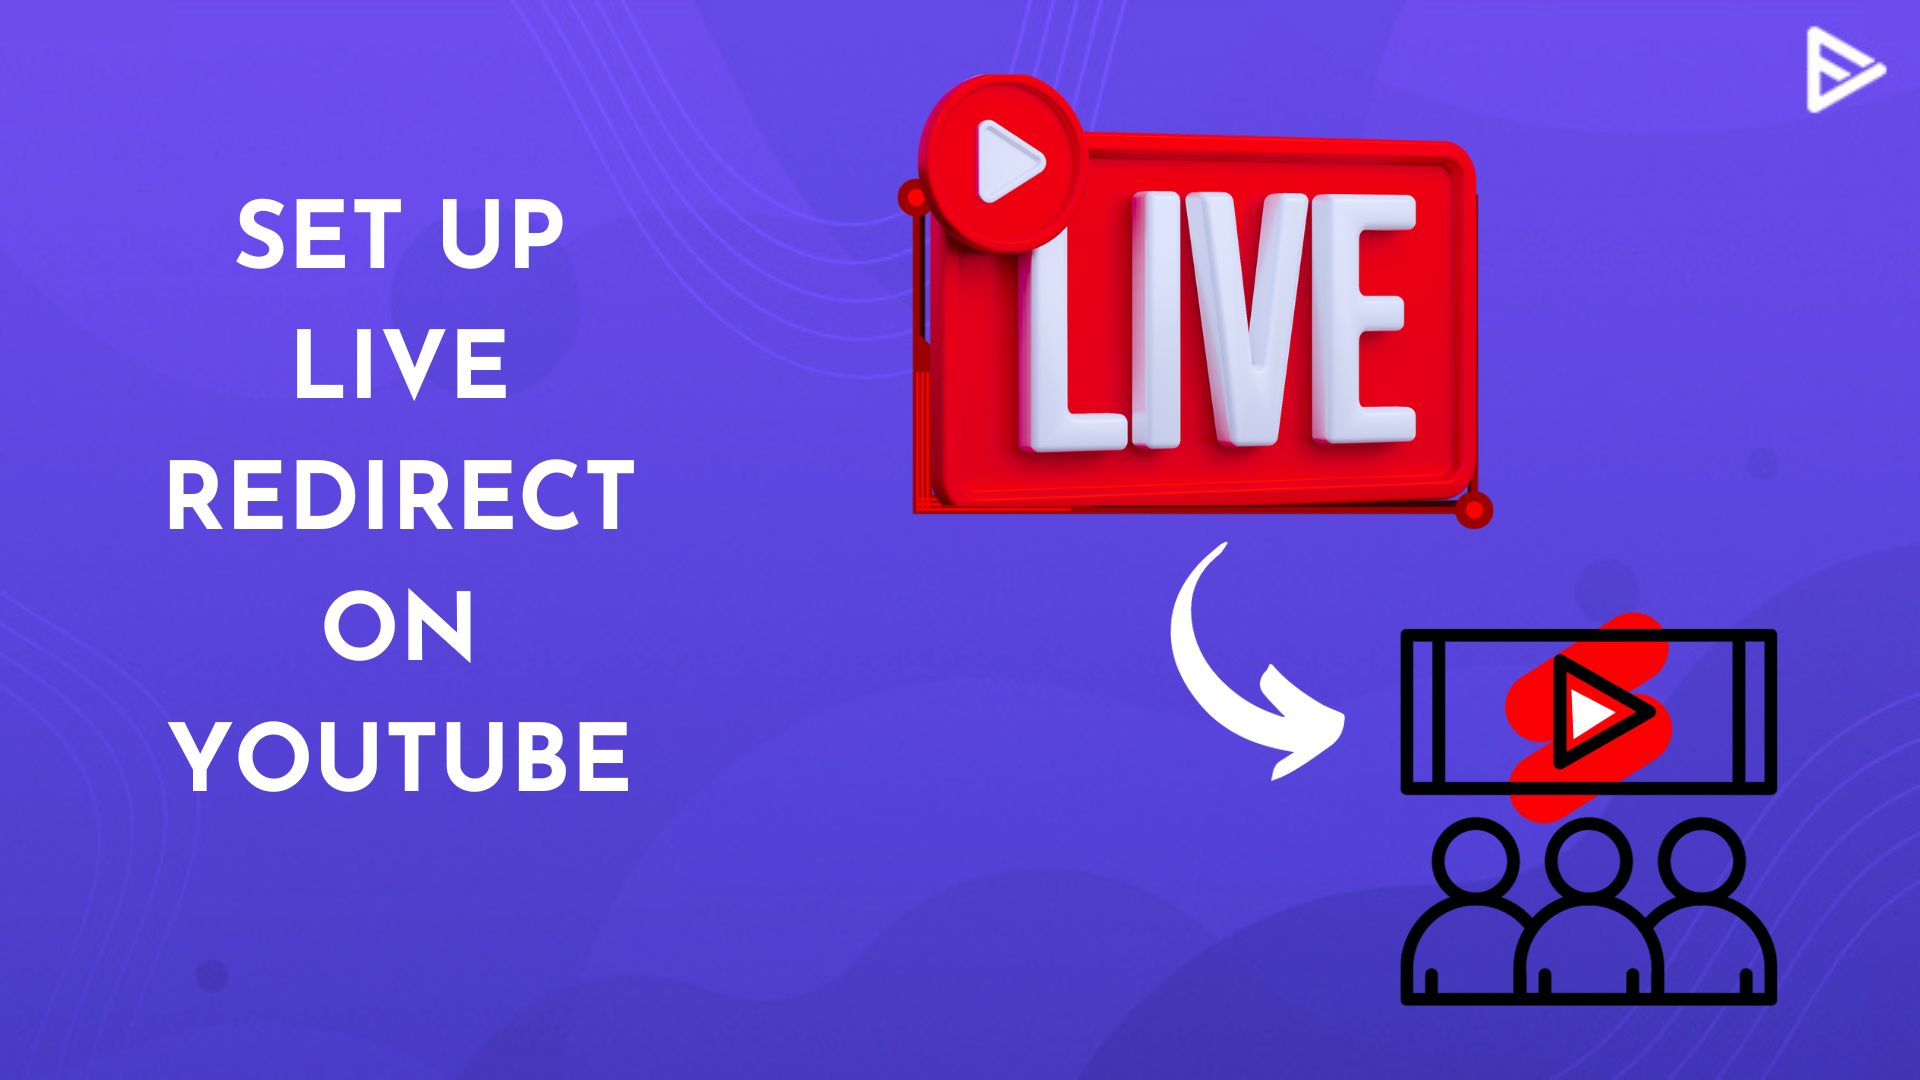 Live redirect YouTube